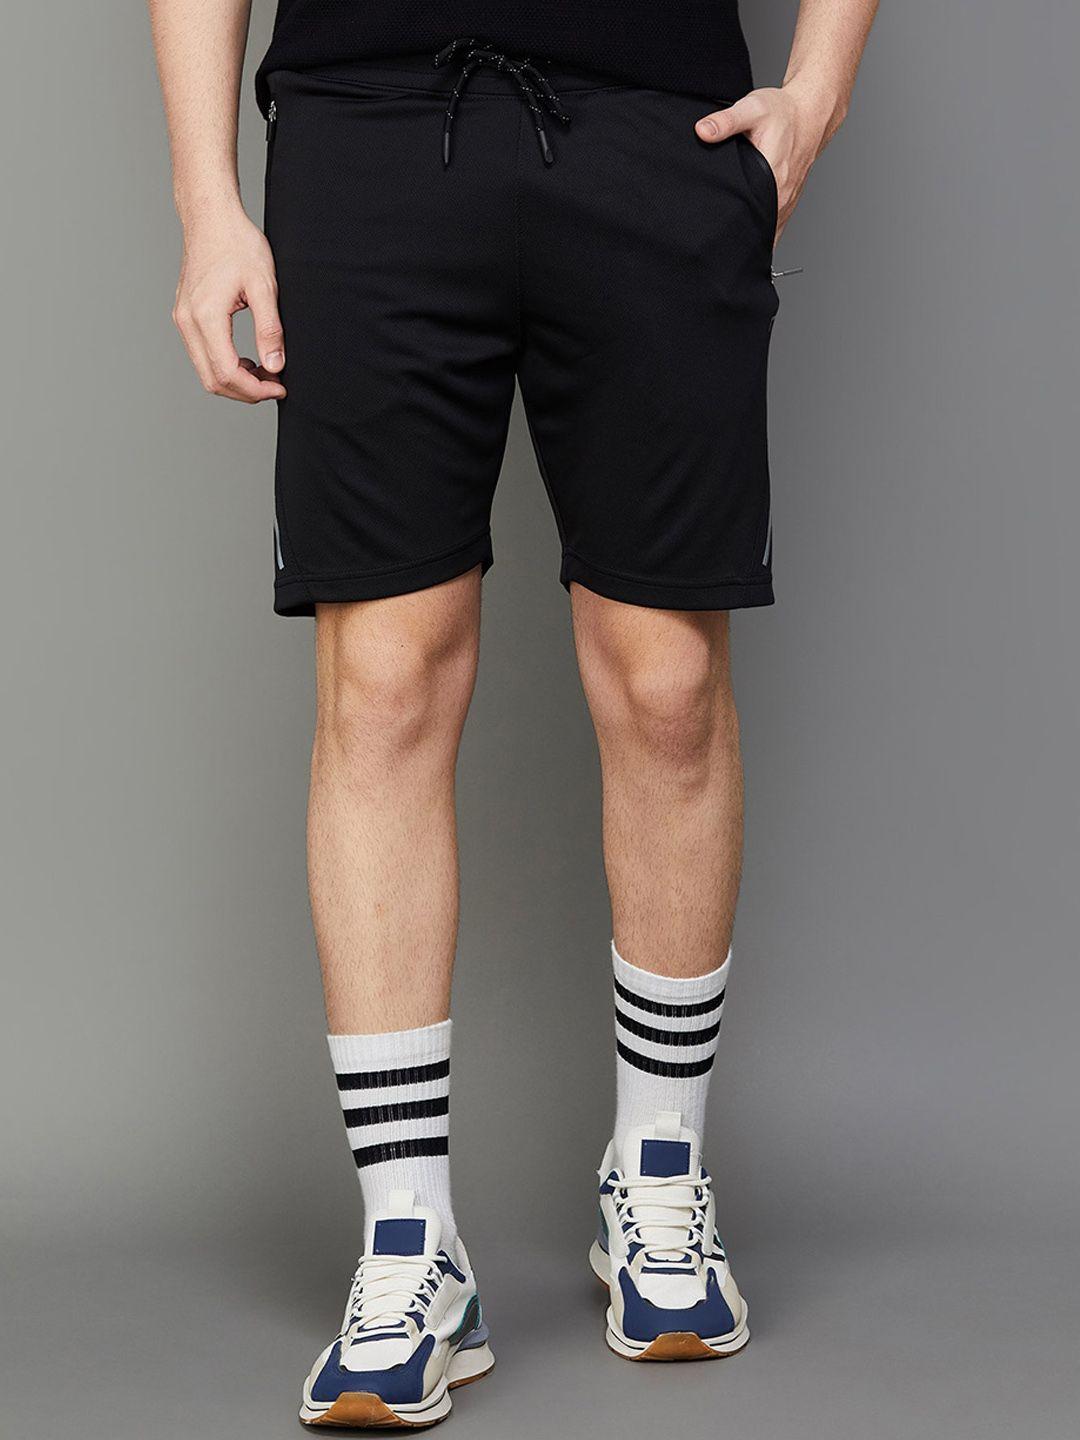 fame-forever-by-lifestyle-men-mid-rise-sports-shorts